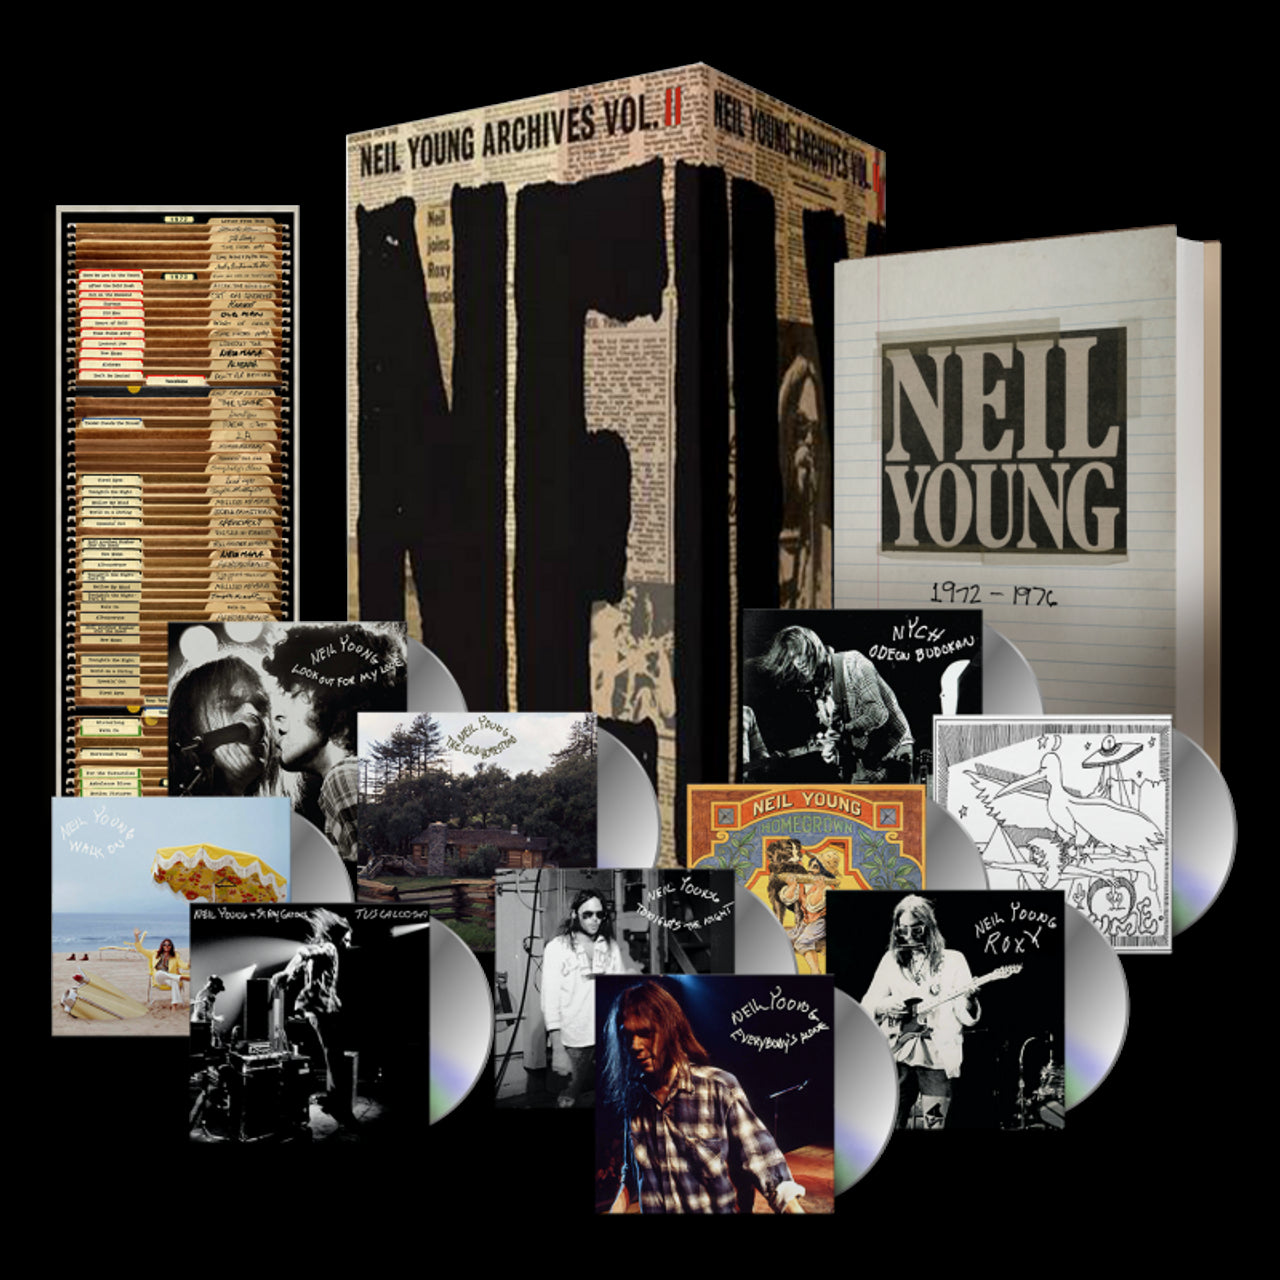 Neil Young Neil Young Archives Vol. II (1972-1976) UK Cd album box set